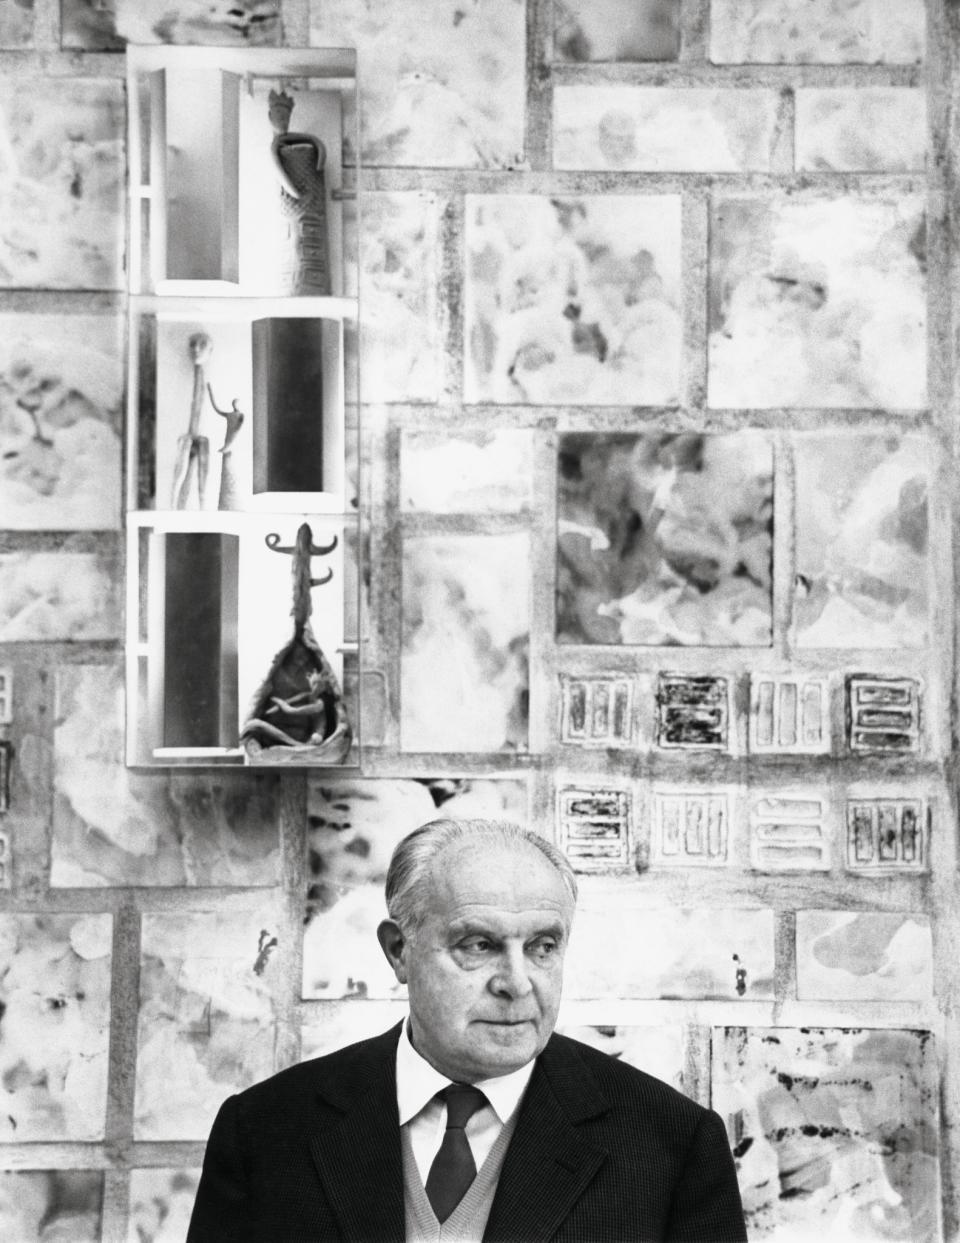 Gio Ponti in 1959 at the New York Alitalia office, with custom Fausto Melotti ceramic wall design, which includes three of the artist’s figurative sculptures placed inside Ponti’s illuminated brass sconce, a Quadro Luminoso, for Arredoluce, 1957.